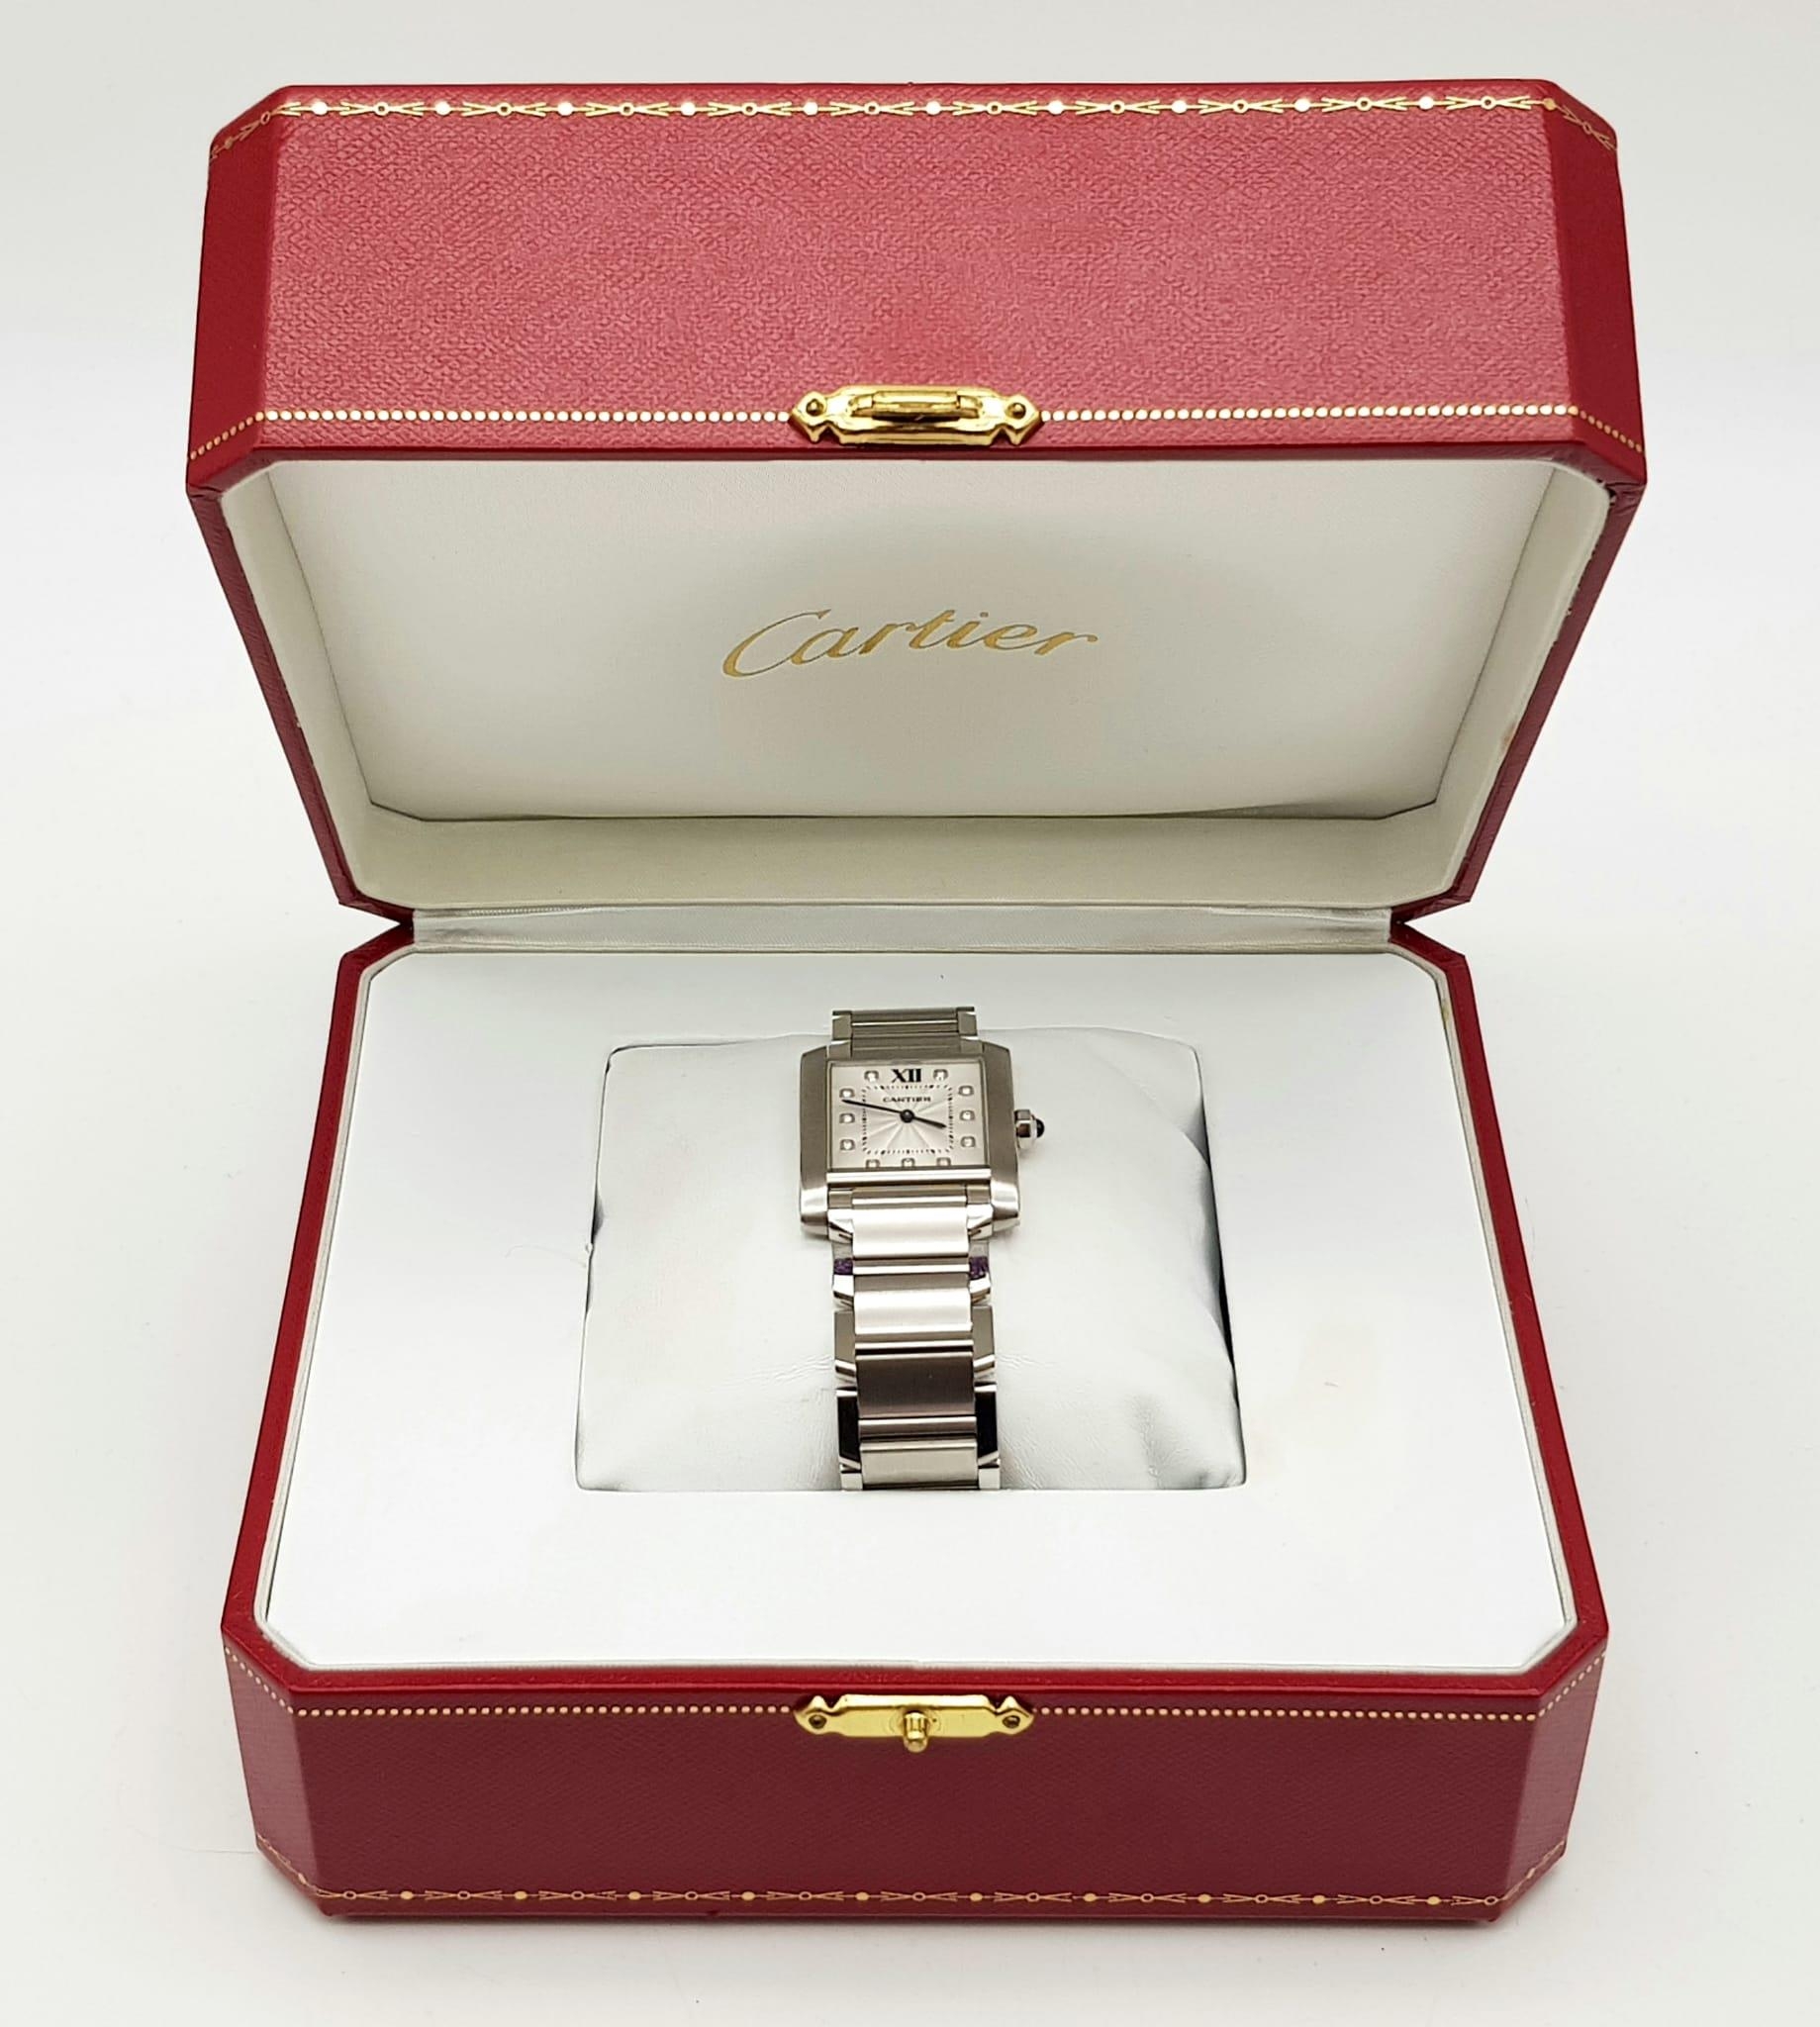 A Cartier Francaise Quartz Ladies Tank Watch. Stainless steel strap and case - 25 x 30mm. White dial - Image 7 of 7